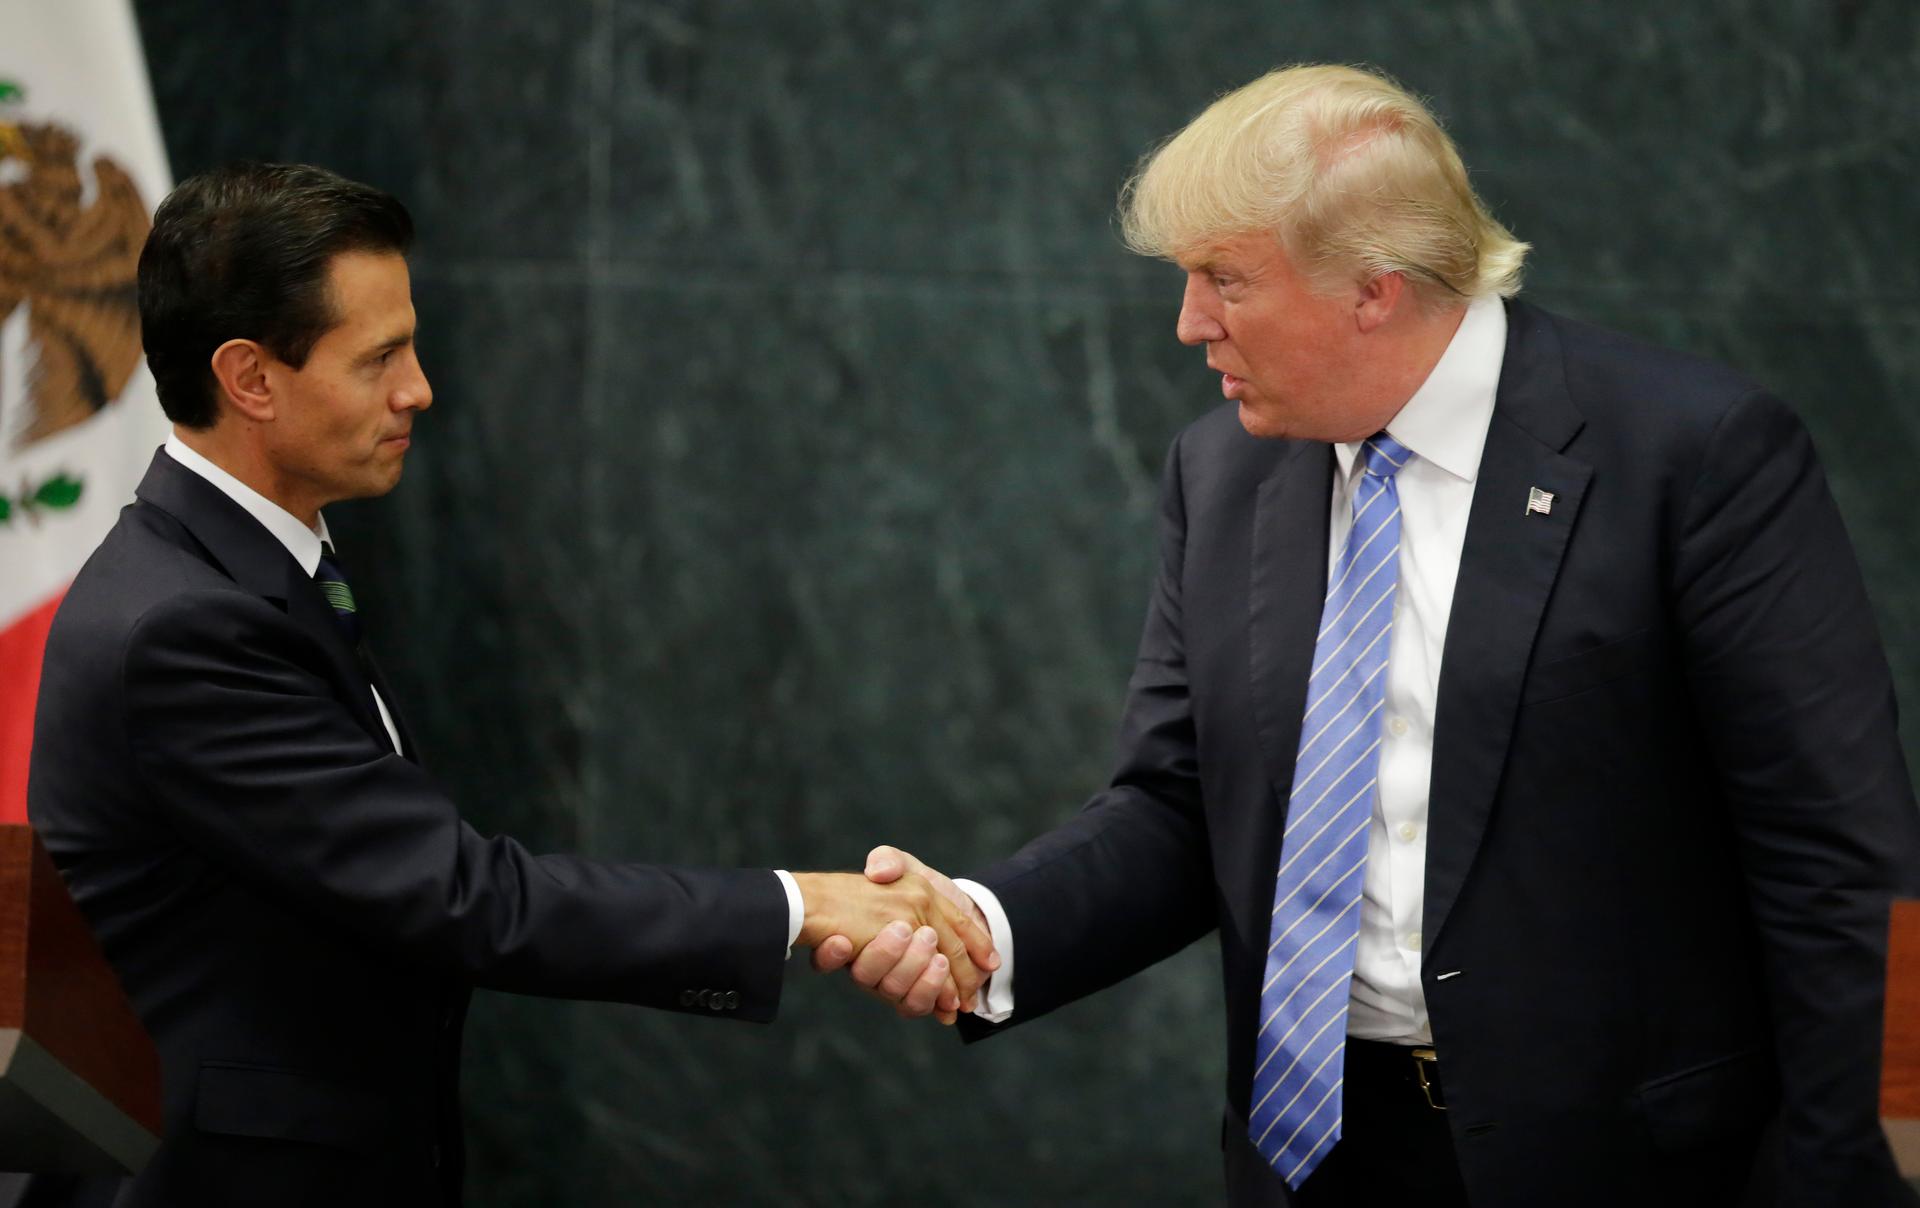 U.S. Republican presidential nominee Donald Trump and Mexico's President Enrique Pena Nieto shake hands at a press conference at the Los Pinos residence in Mexico City, Mexico, August 31, 2016. 